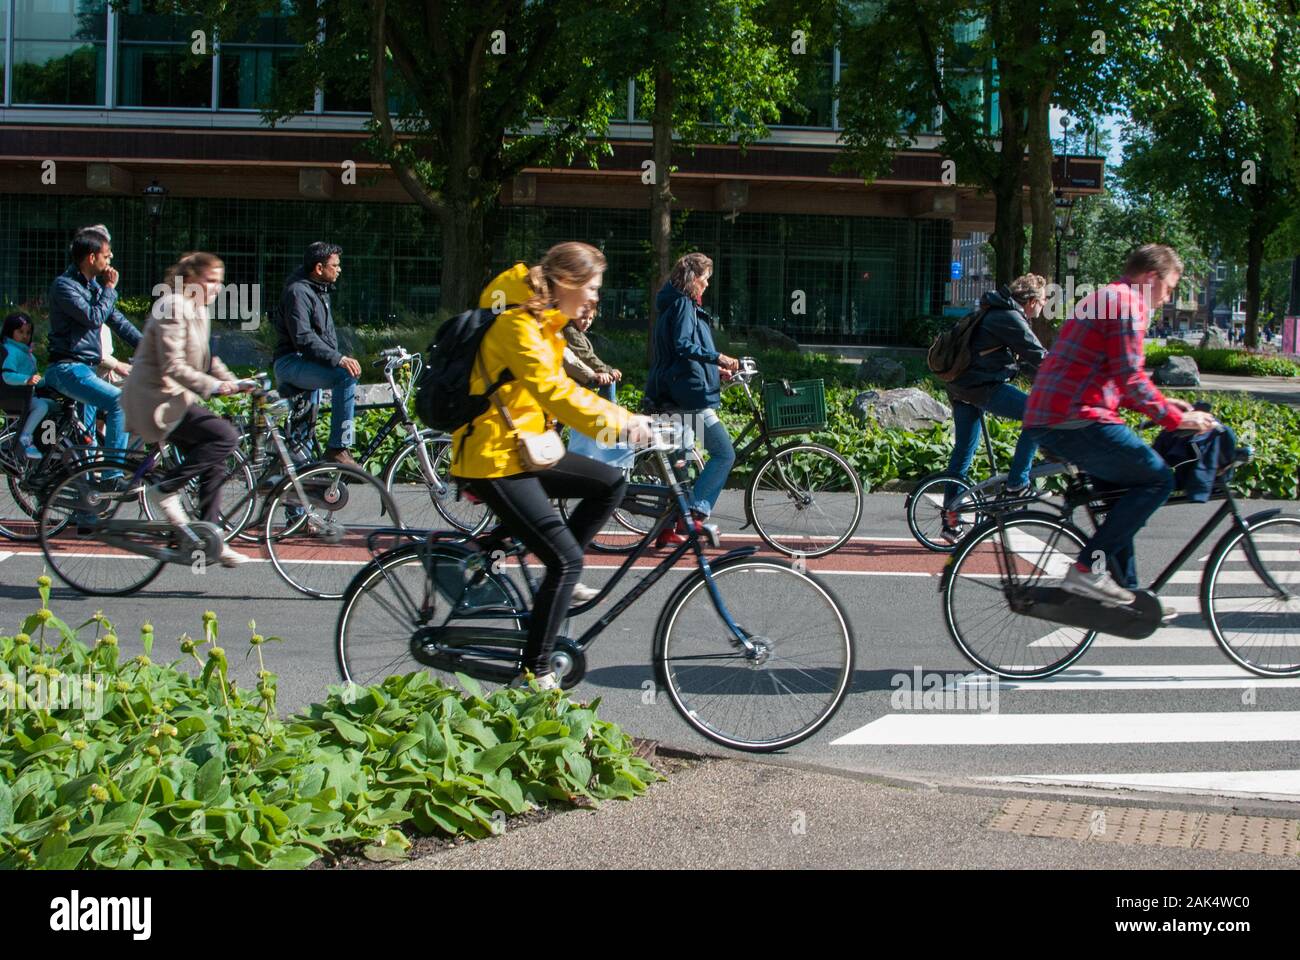 People riding bicyle in the city in a sunny day Stock Photo